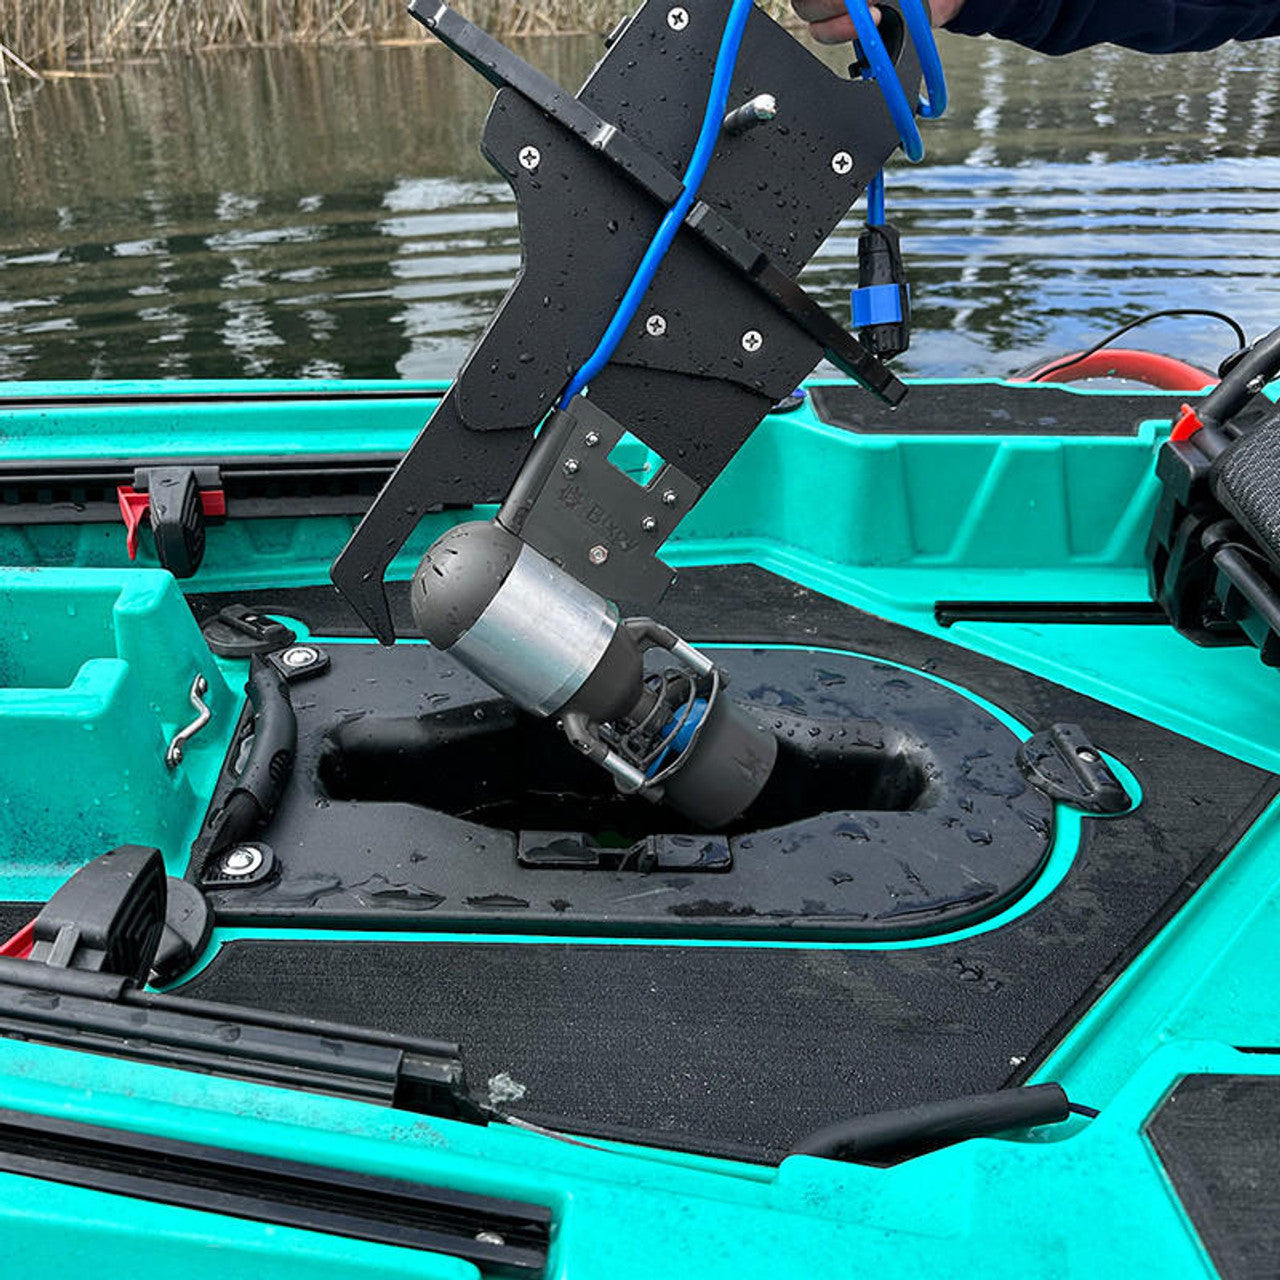 Bixpy K-1 Outboard Kit with SUN80 Solar Panel - Electric Marine Trolling Motor with 378 Wh Battery,Perfect for Kayak, Inflatable Watercraft, Paddle Boards